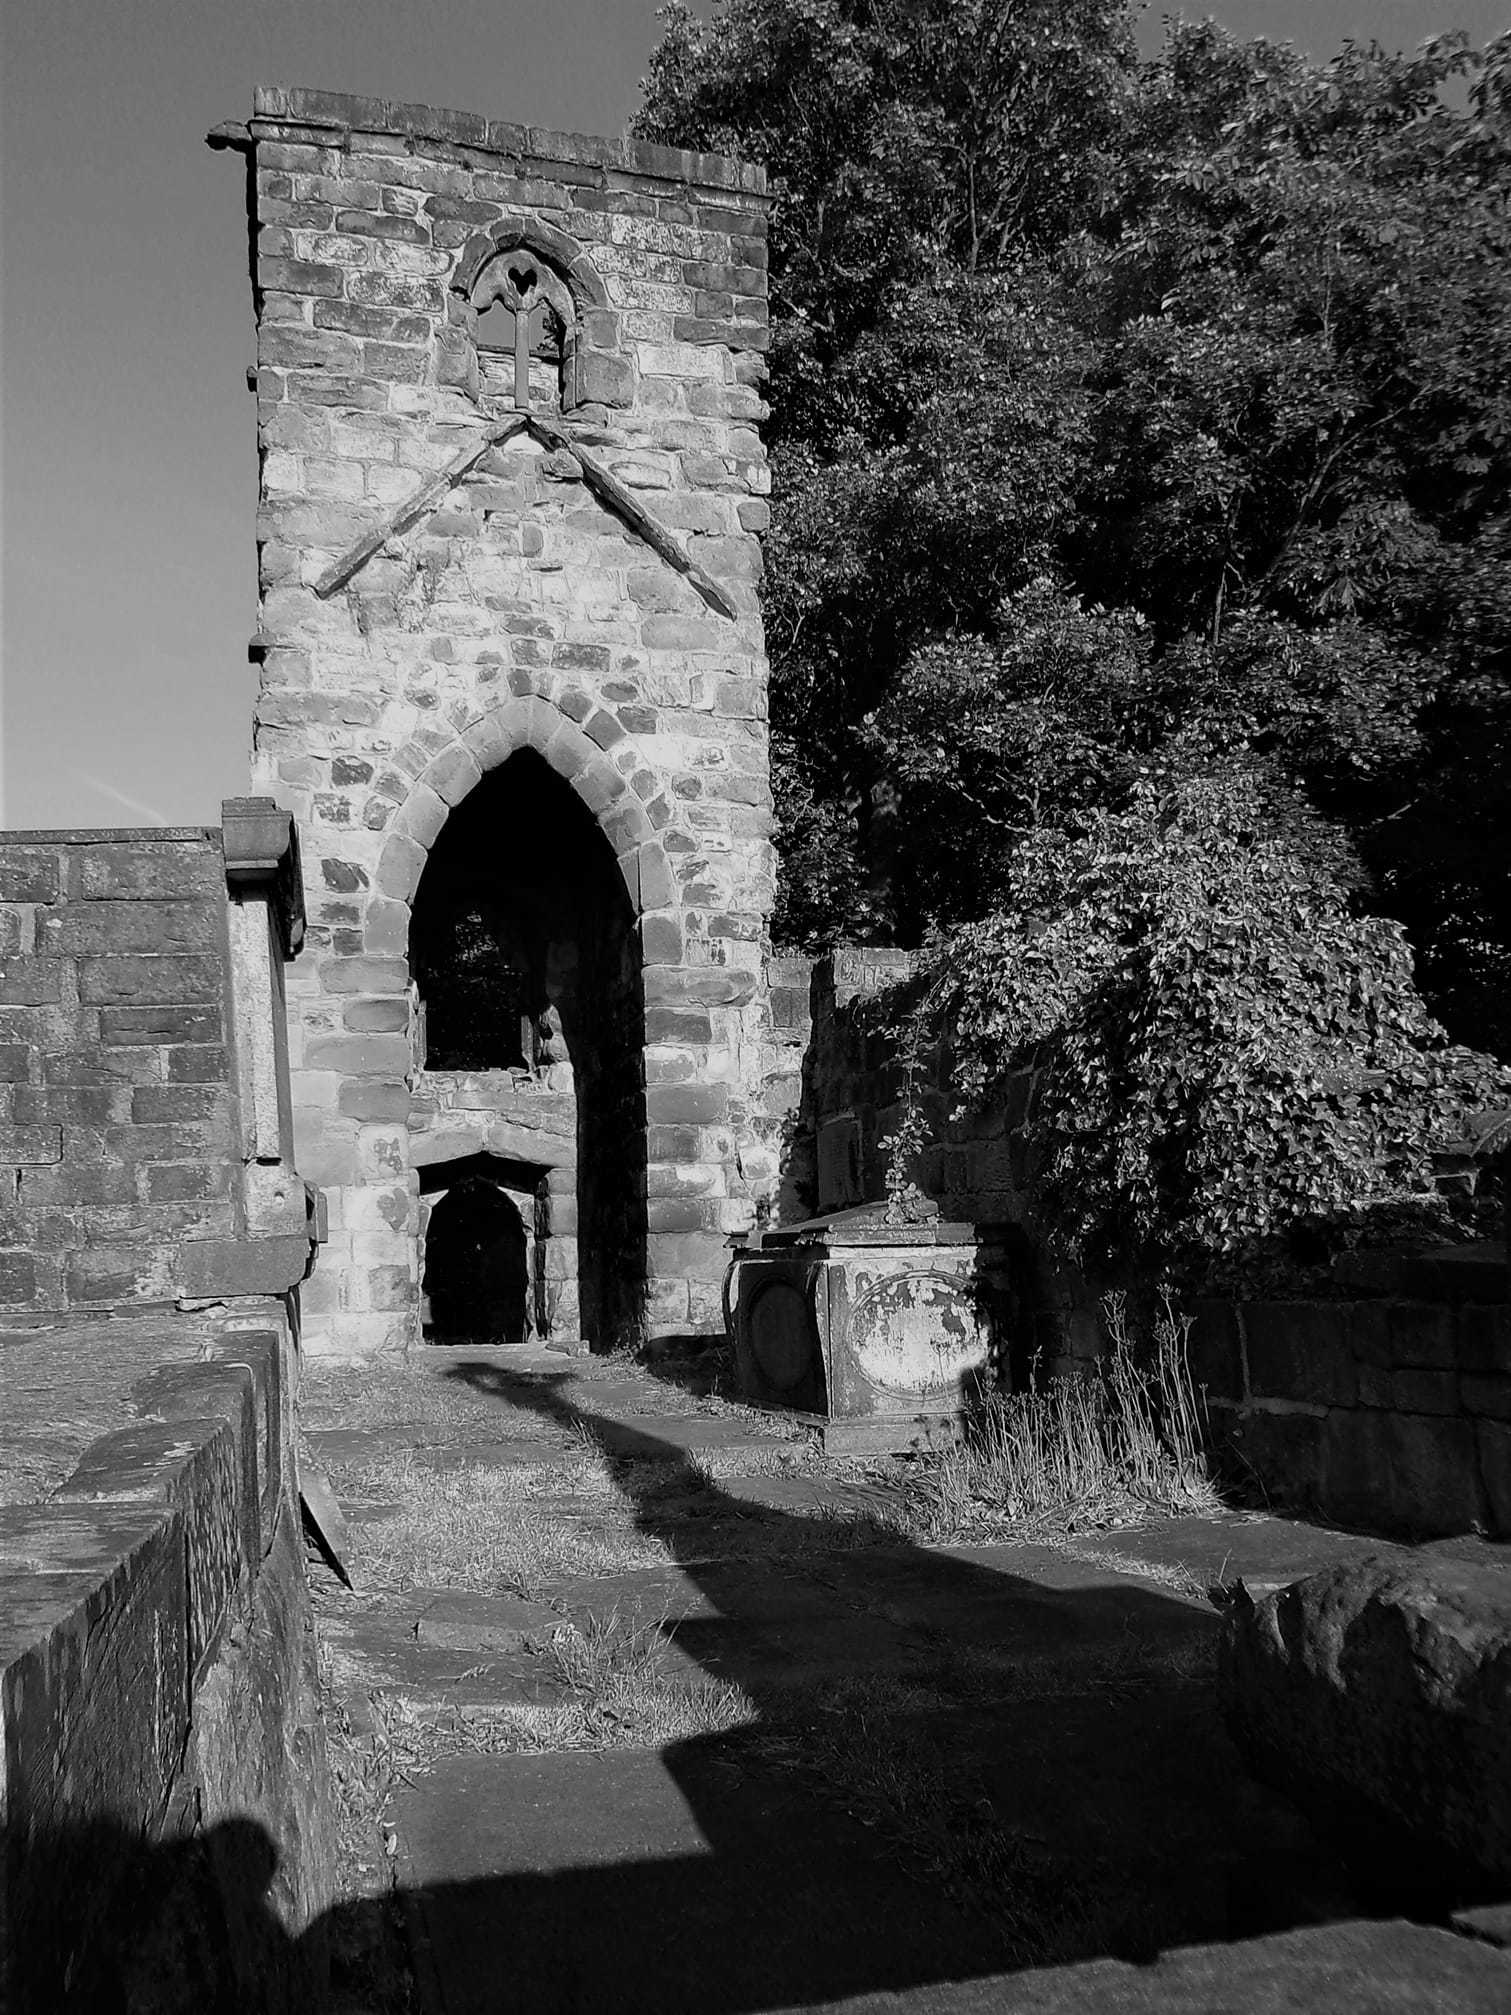 Black and white shadows at St Helens Chantry by Suzie Remadems